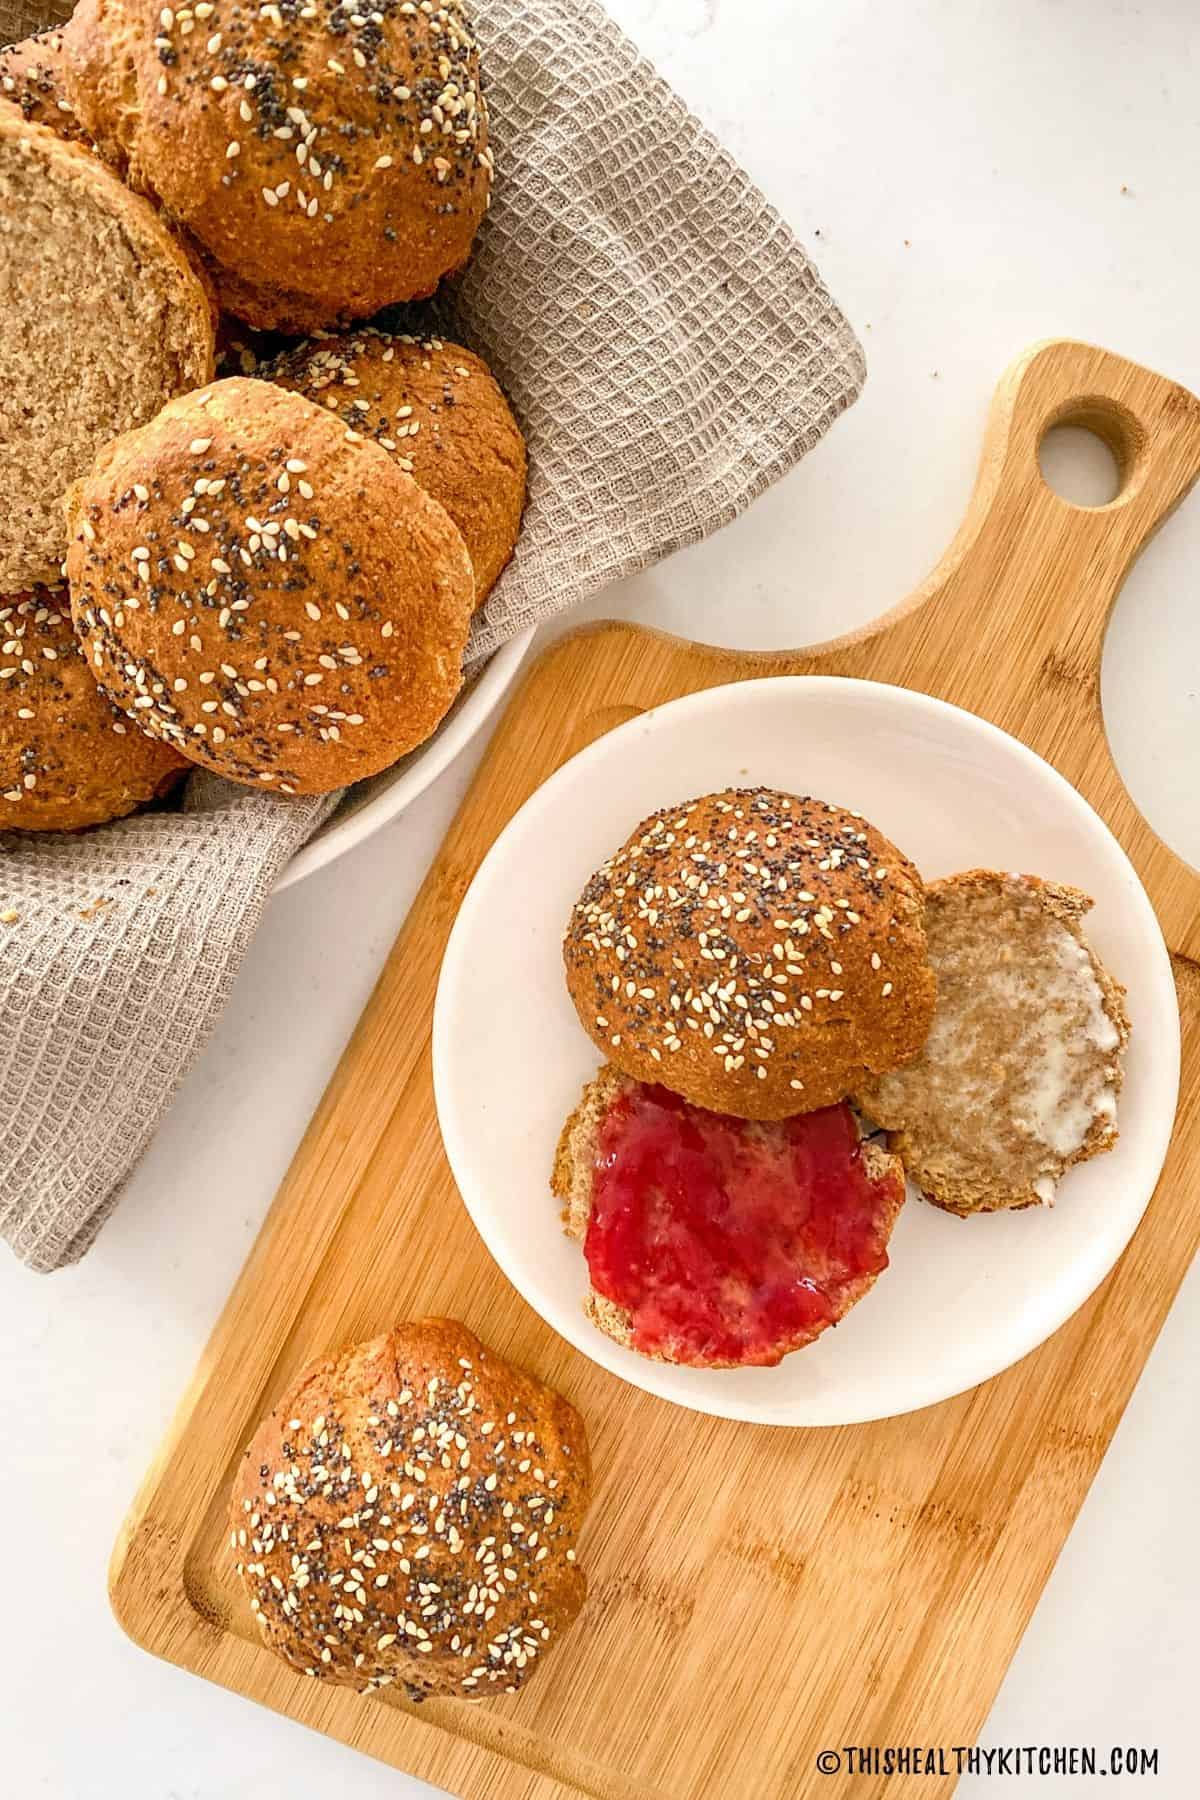 Hamburger buns in bread basket with one sliced open bun on plate with jam on one half and butter on the other.